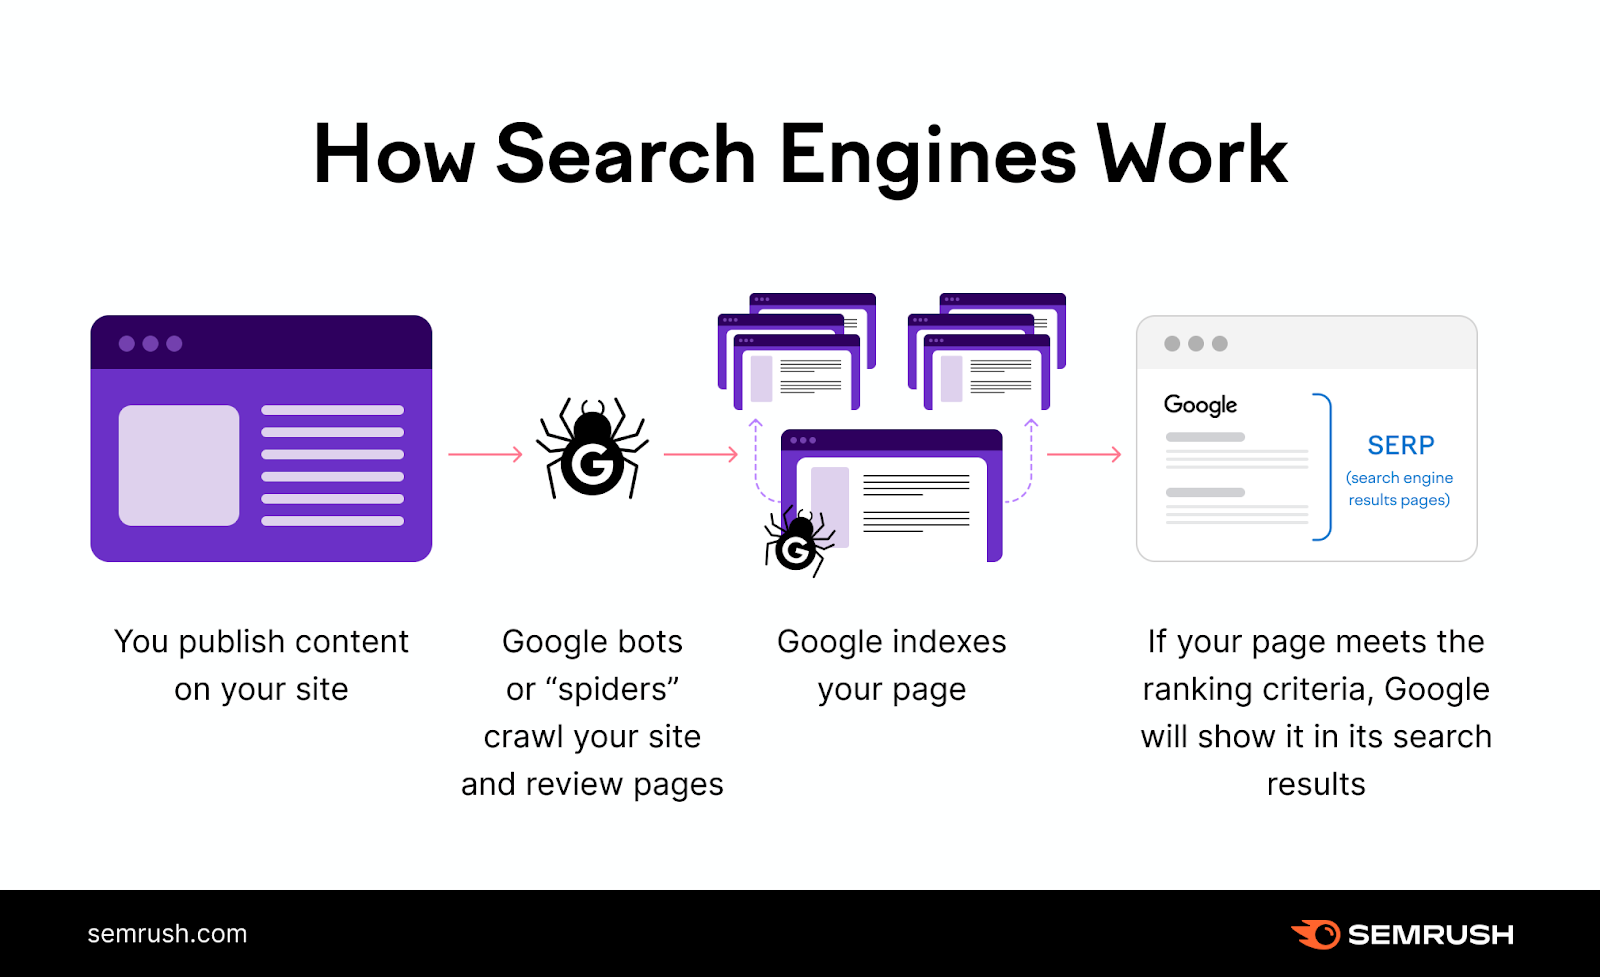 An infographic showing how search engines work